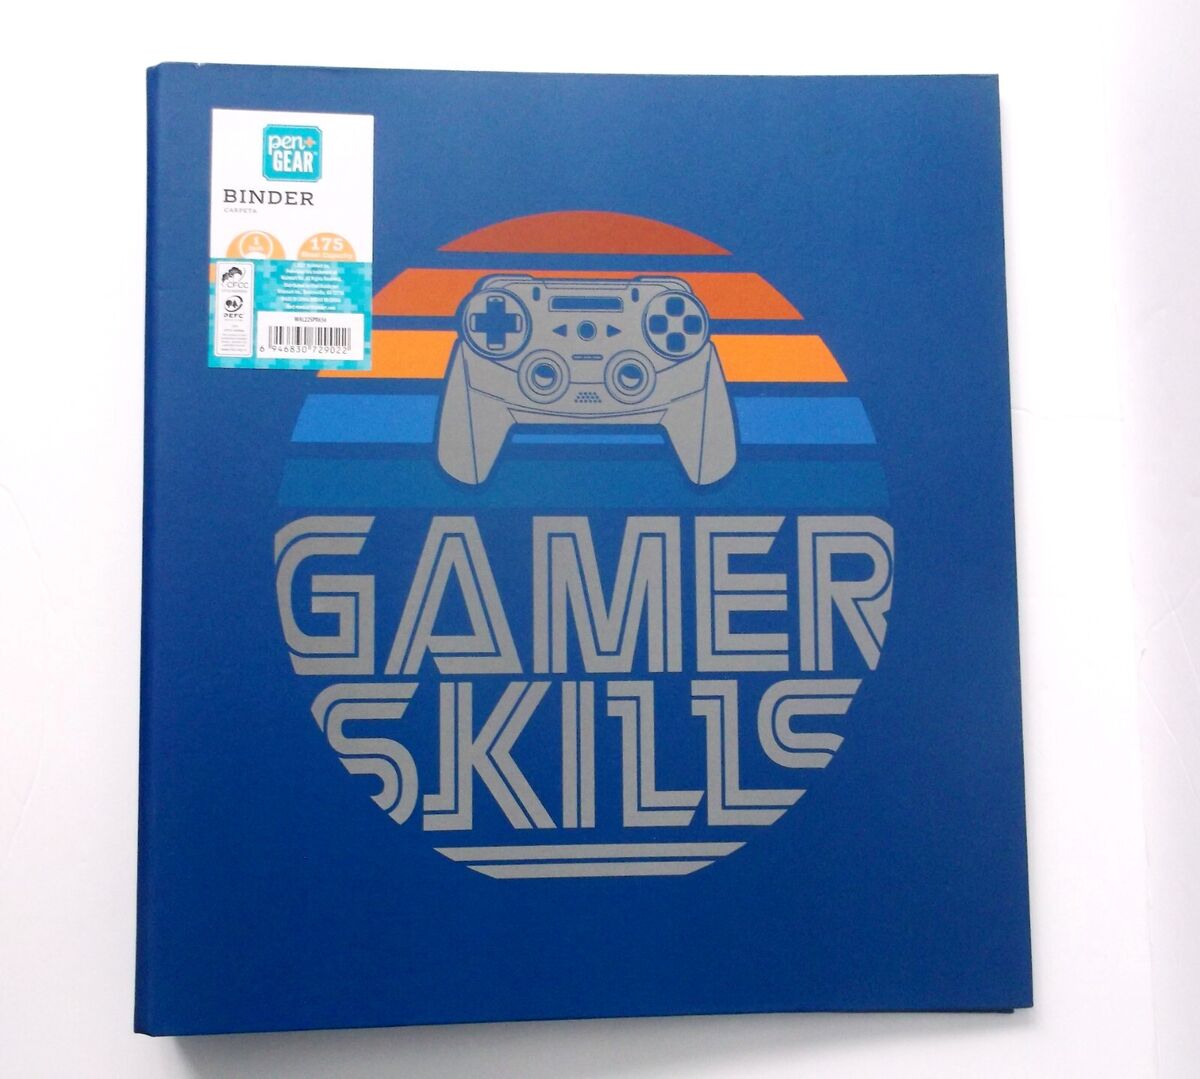 PEN AND GEAR - 1 BINDER - GAMER SKILLS - The Stationery Store